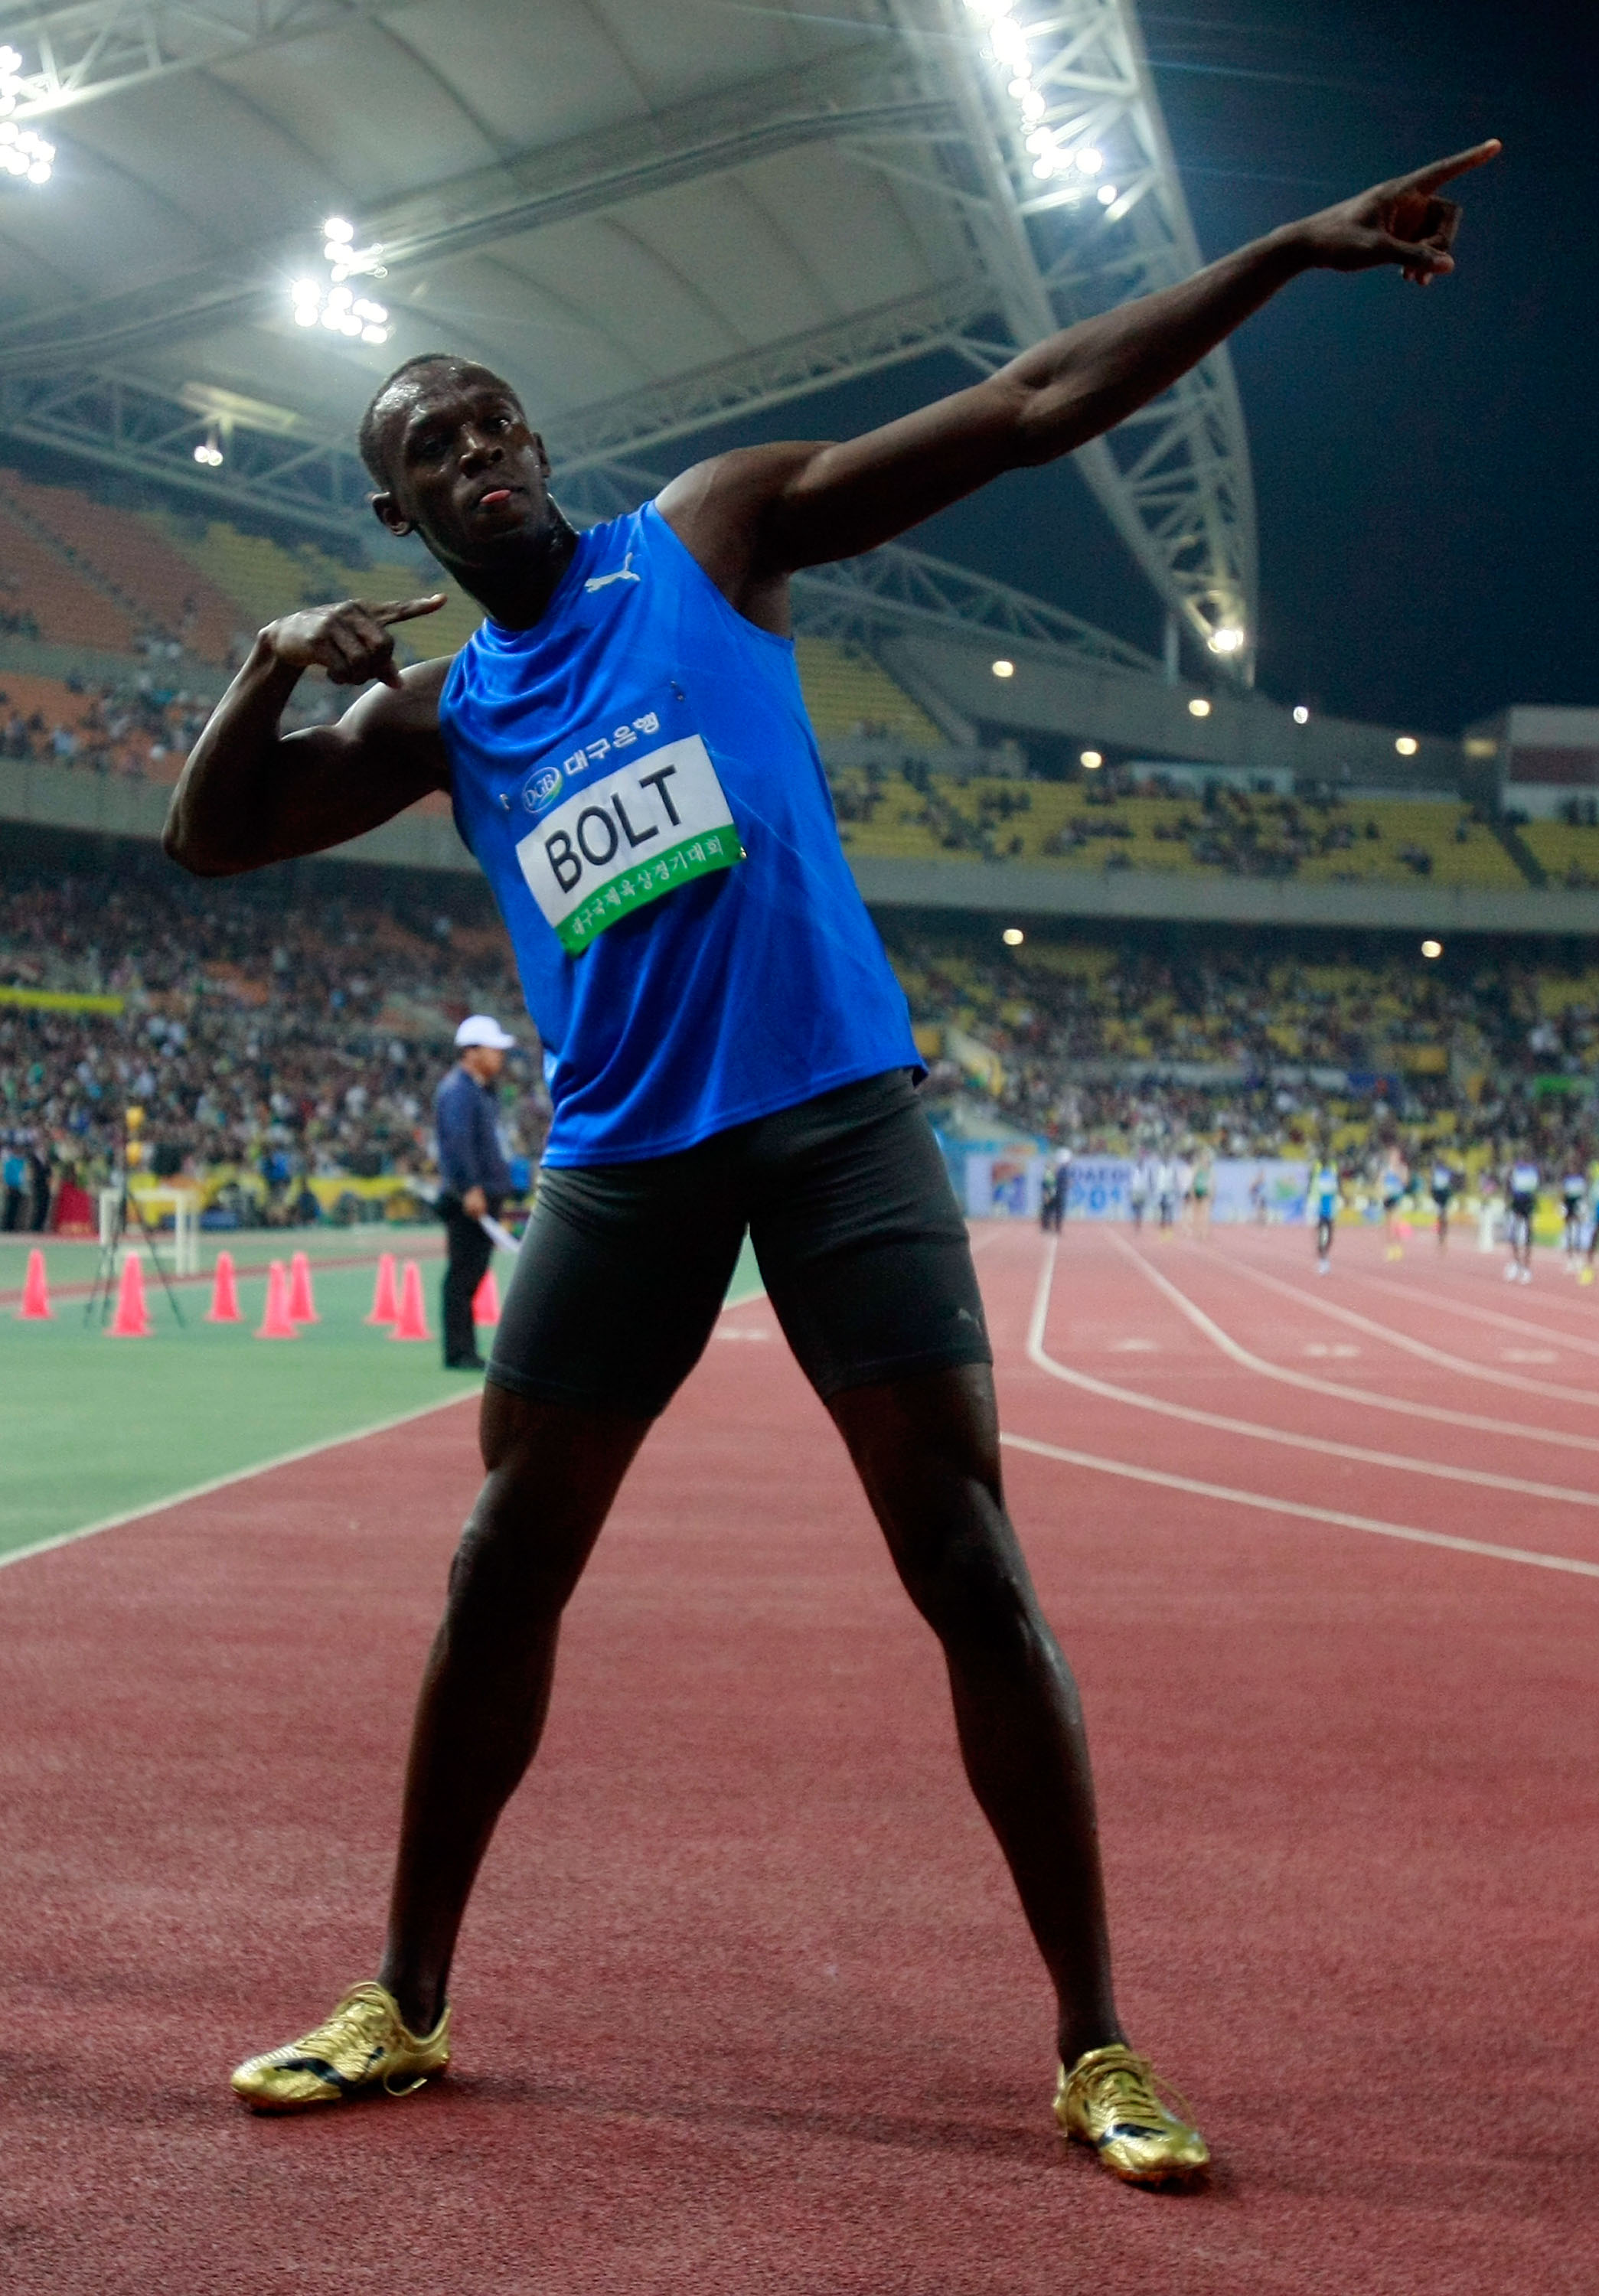 DAEGU, SOUTH KOREA - MAY 19:  Usain Bolt of Jamaica celebrates after winning the men's 100 metre race during the Colorful Daegu Pre-Championships Meeting 2010 at Daegu Stadium on May 19, 2010 in Daegu, South Korea. Bolt won the race at 9.86.  (Photo by Ch